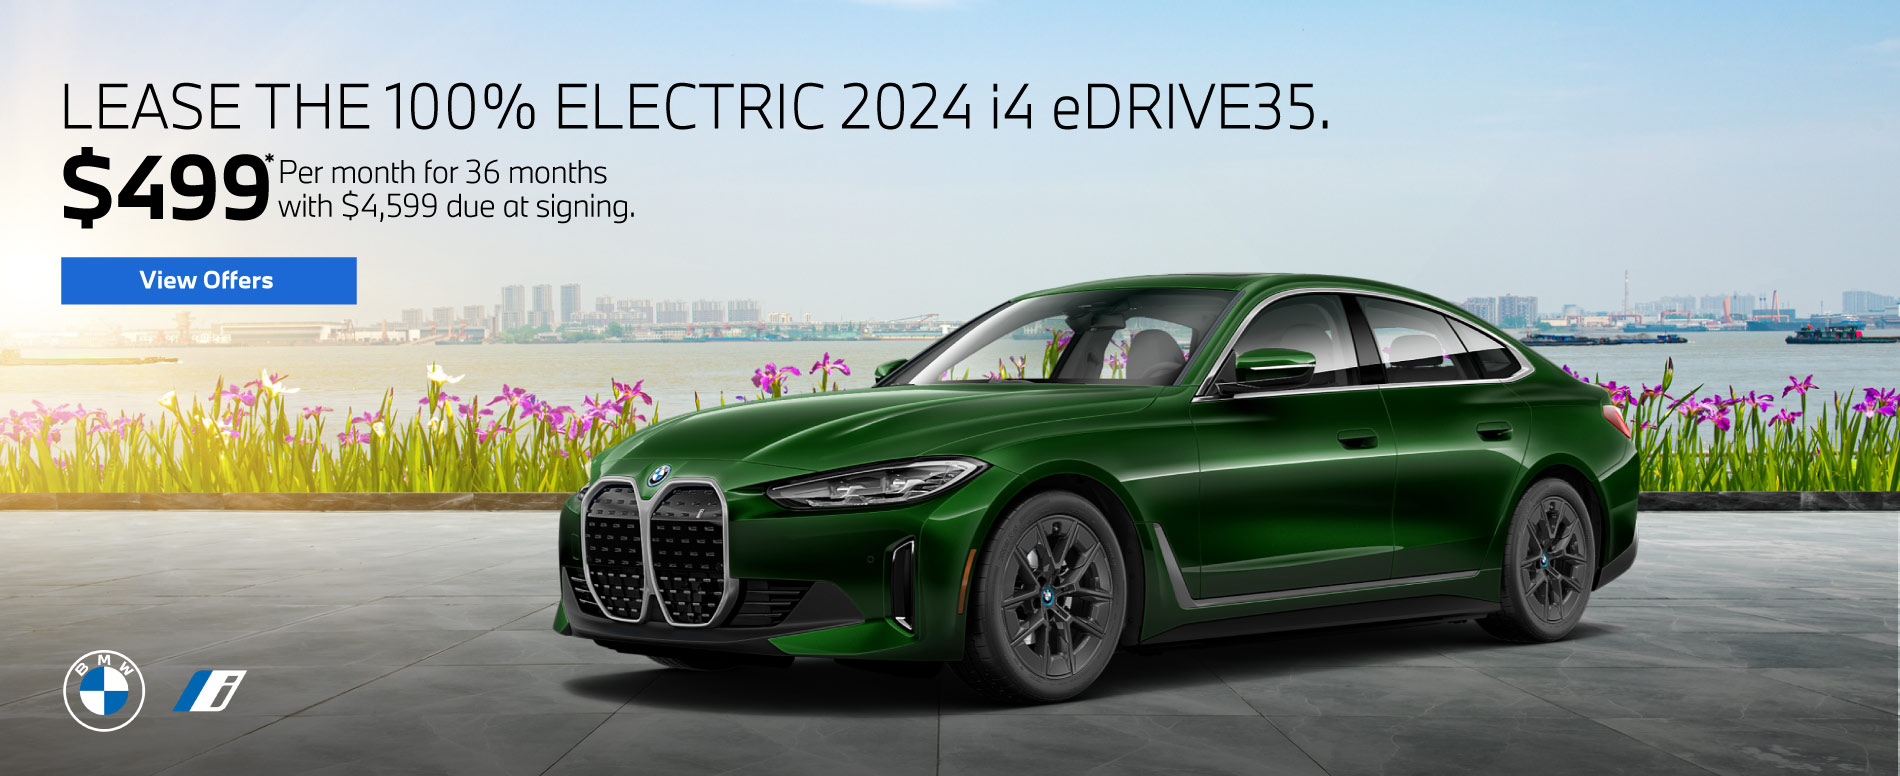 Lease the 2024 i4 eDrive35 - $499 per month* - View Offers